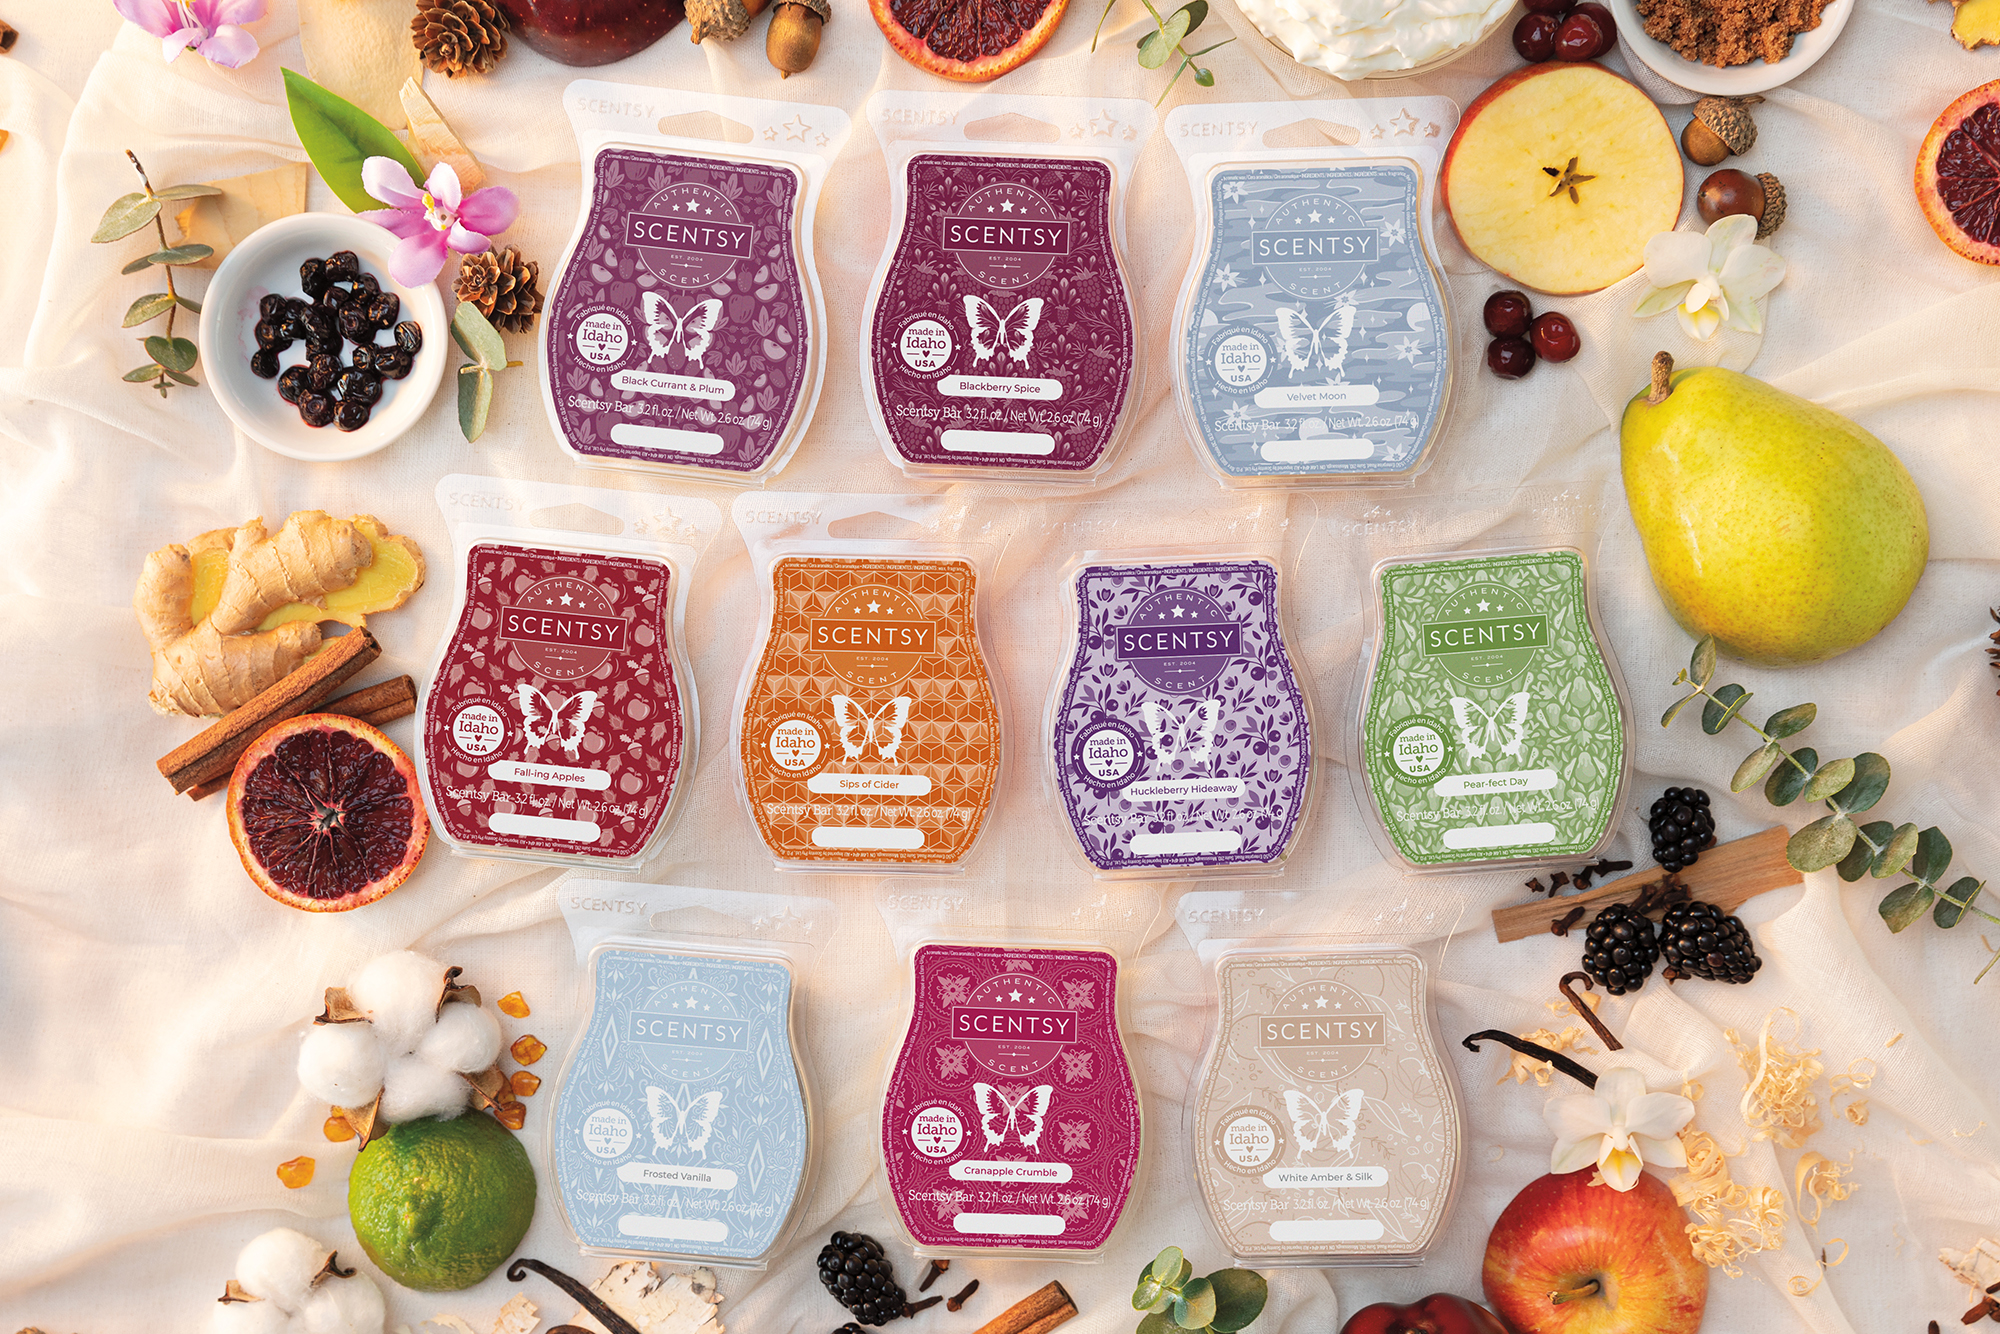 Scentsy’s new Fall/Winter 2022 fragrances